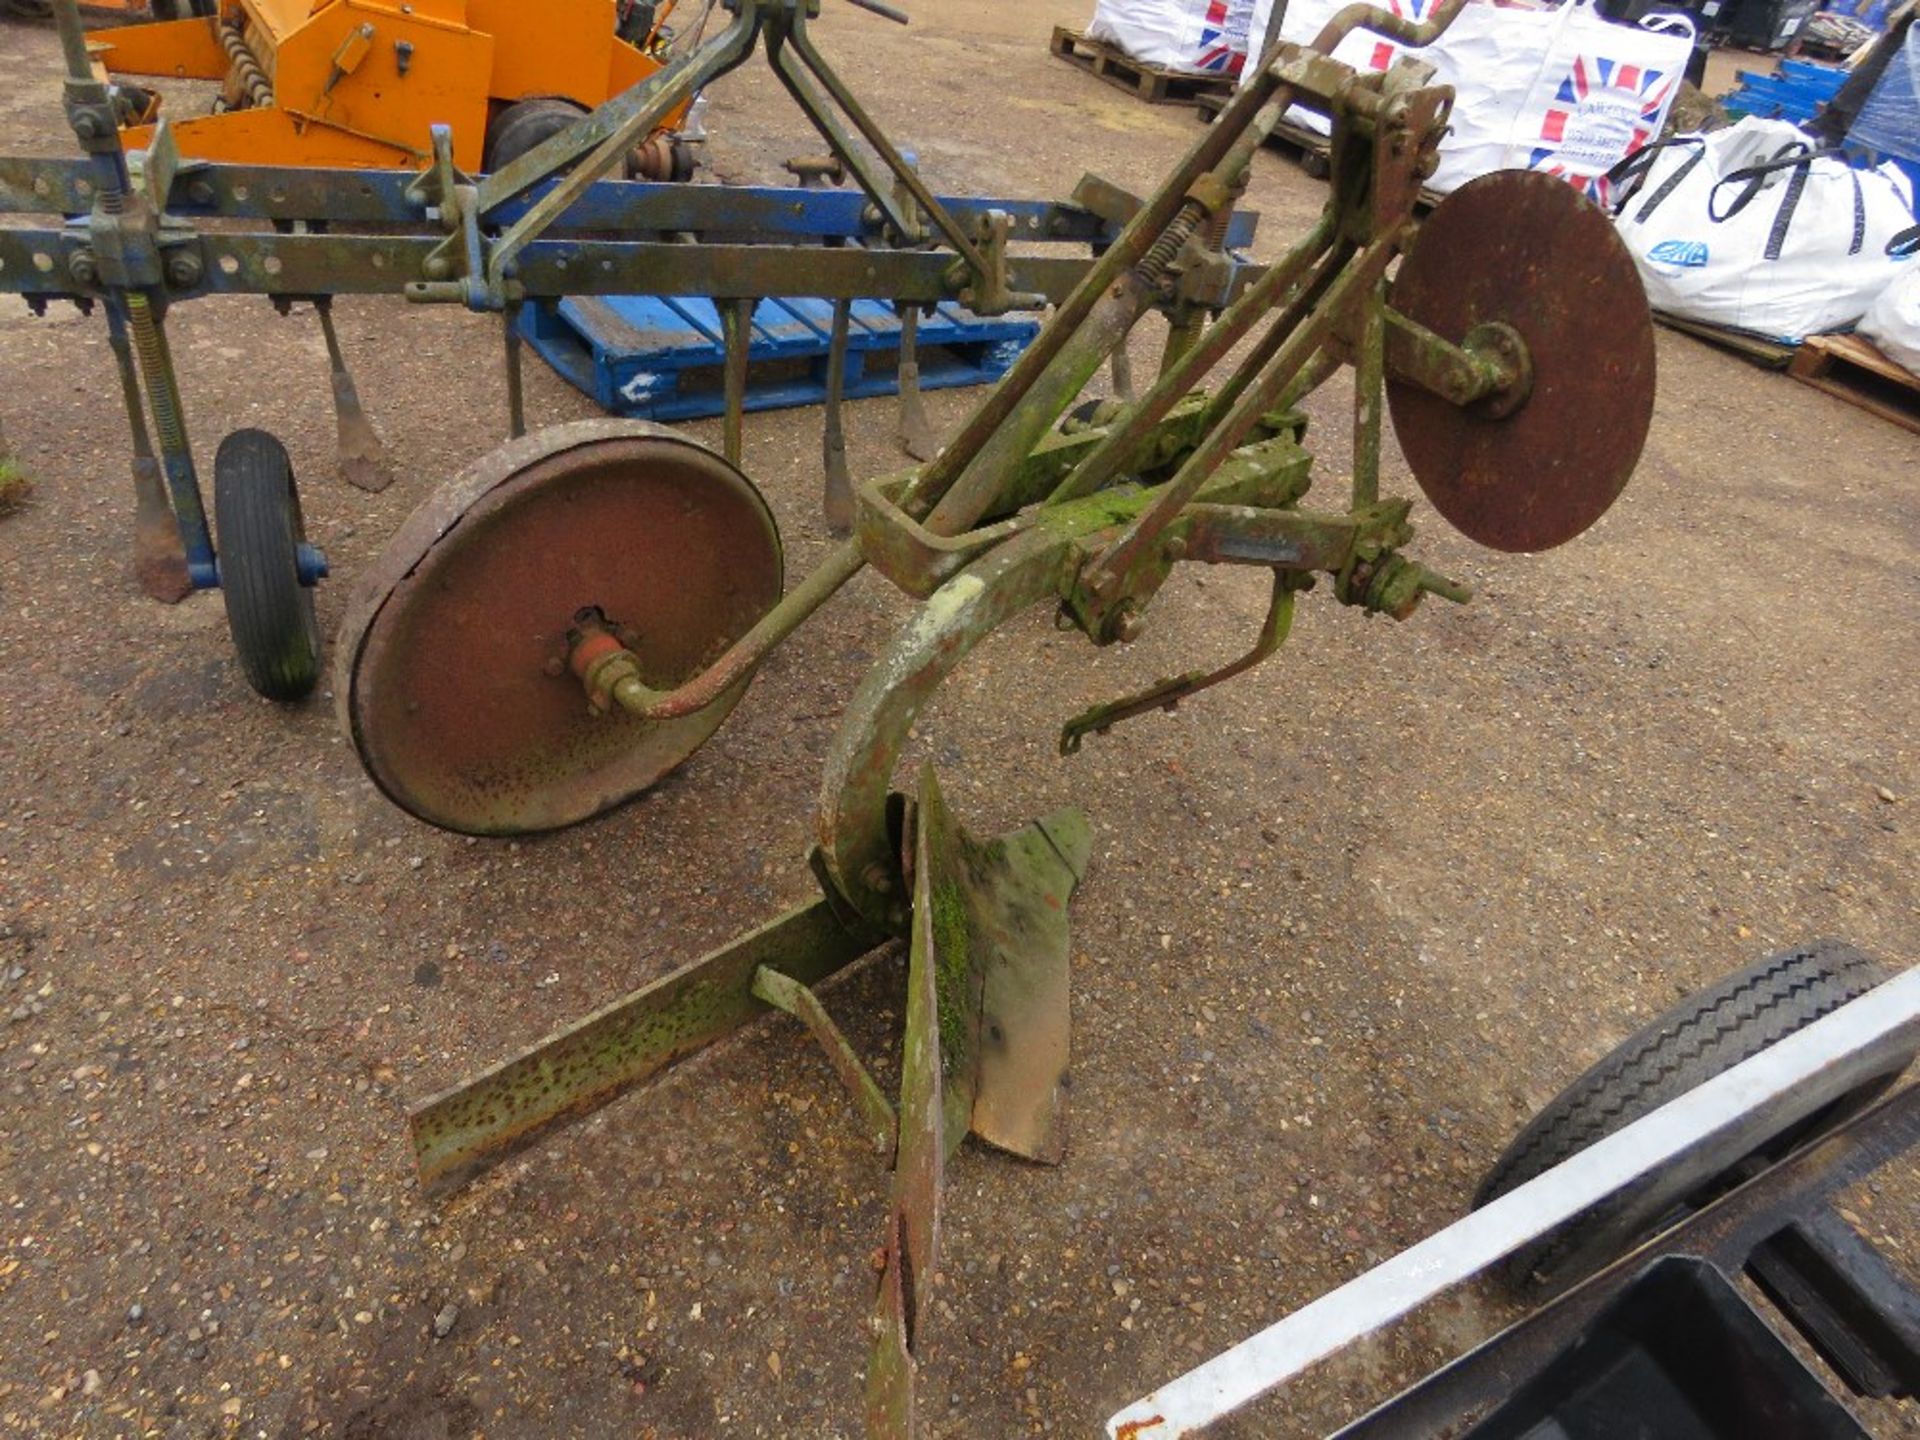 SINGLE FURROW TRACTOR MOUNTED PLOUGH.....THIS LOT IS SOLD UNDER THE AUCTIONEERS MARGIN SCHEME, THERE